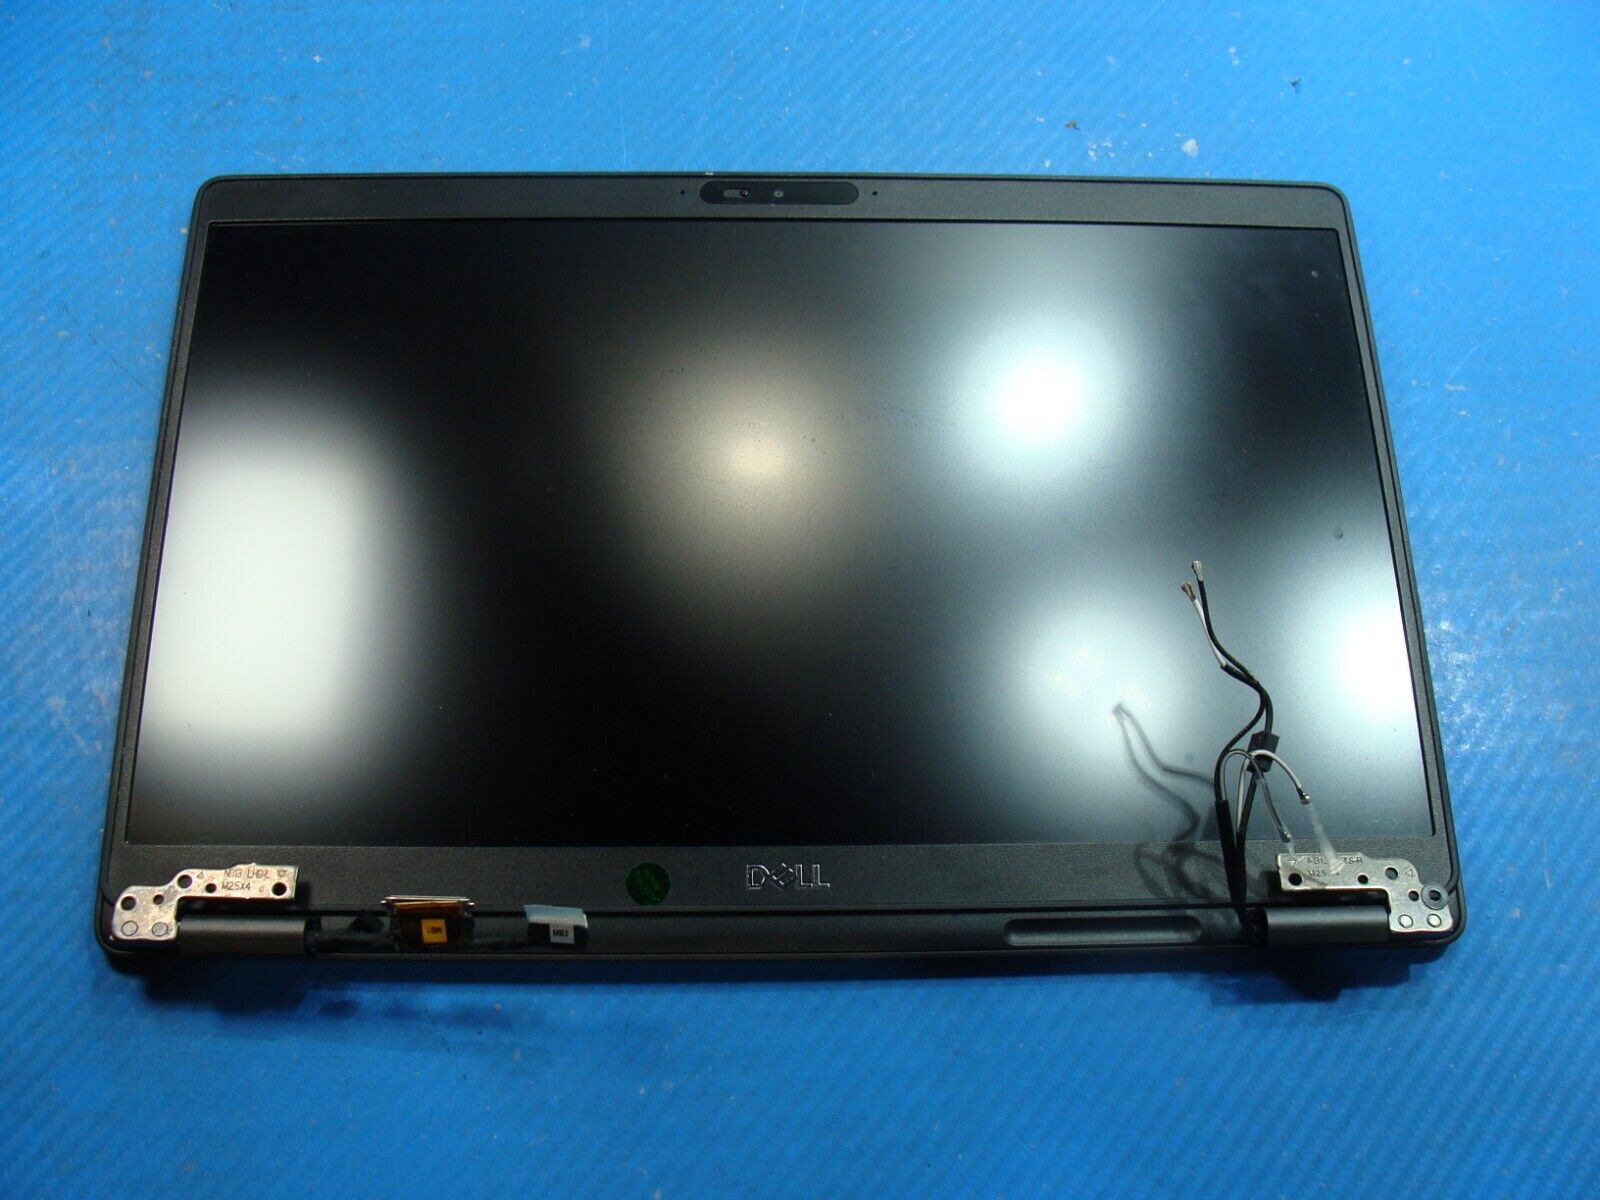 Dell Latitude 5300 13.3 Genuine Laptop FHD LCD Screen Complete Assembly